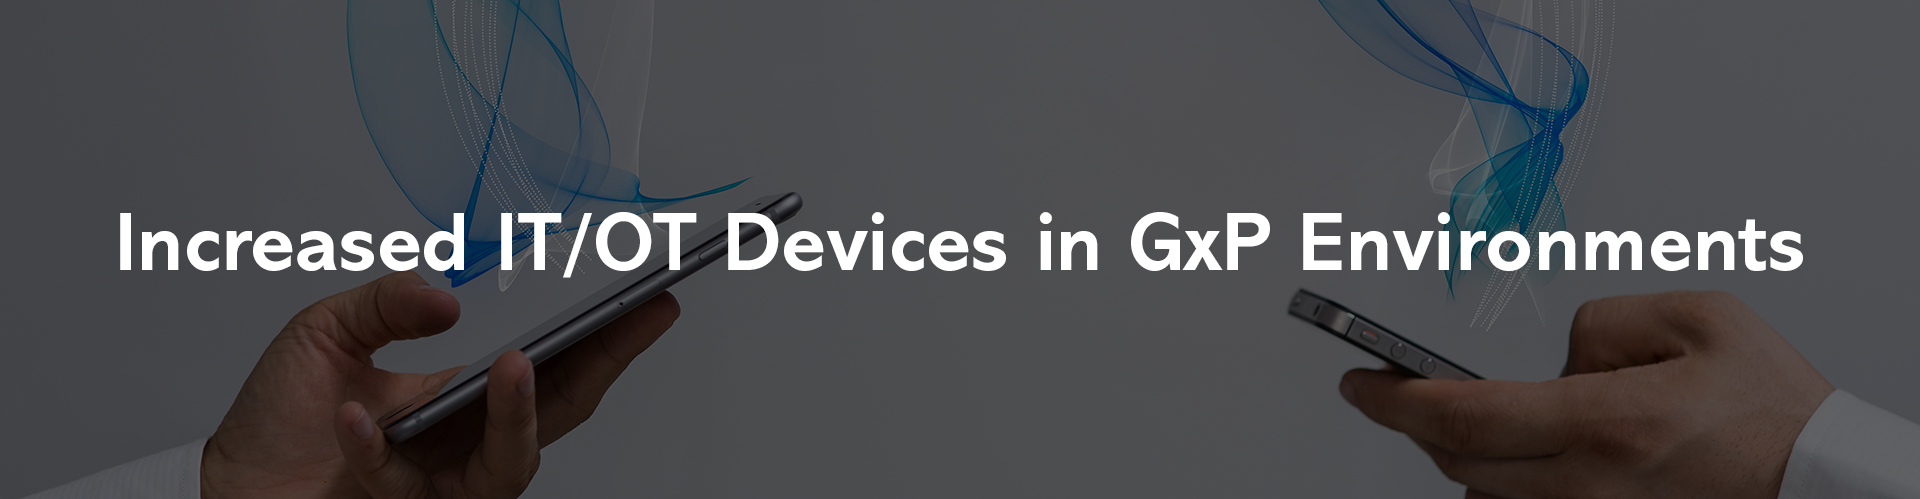 Increased IT/OT Devices in GxP Environments